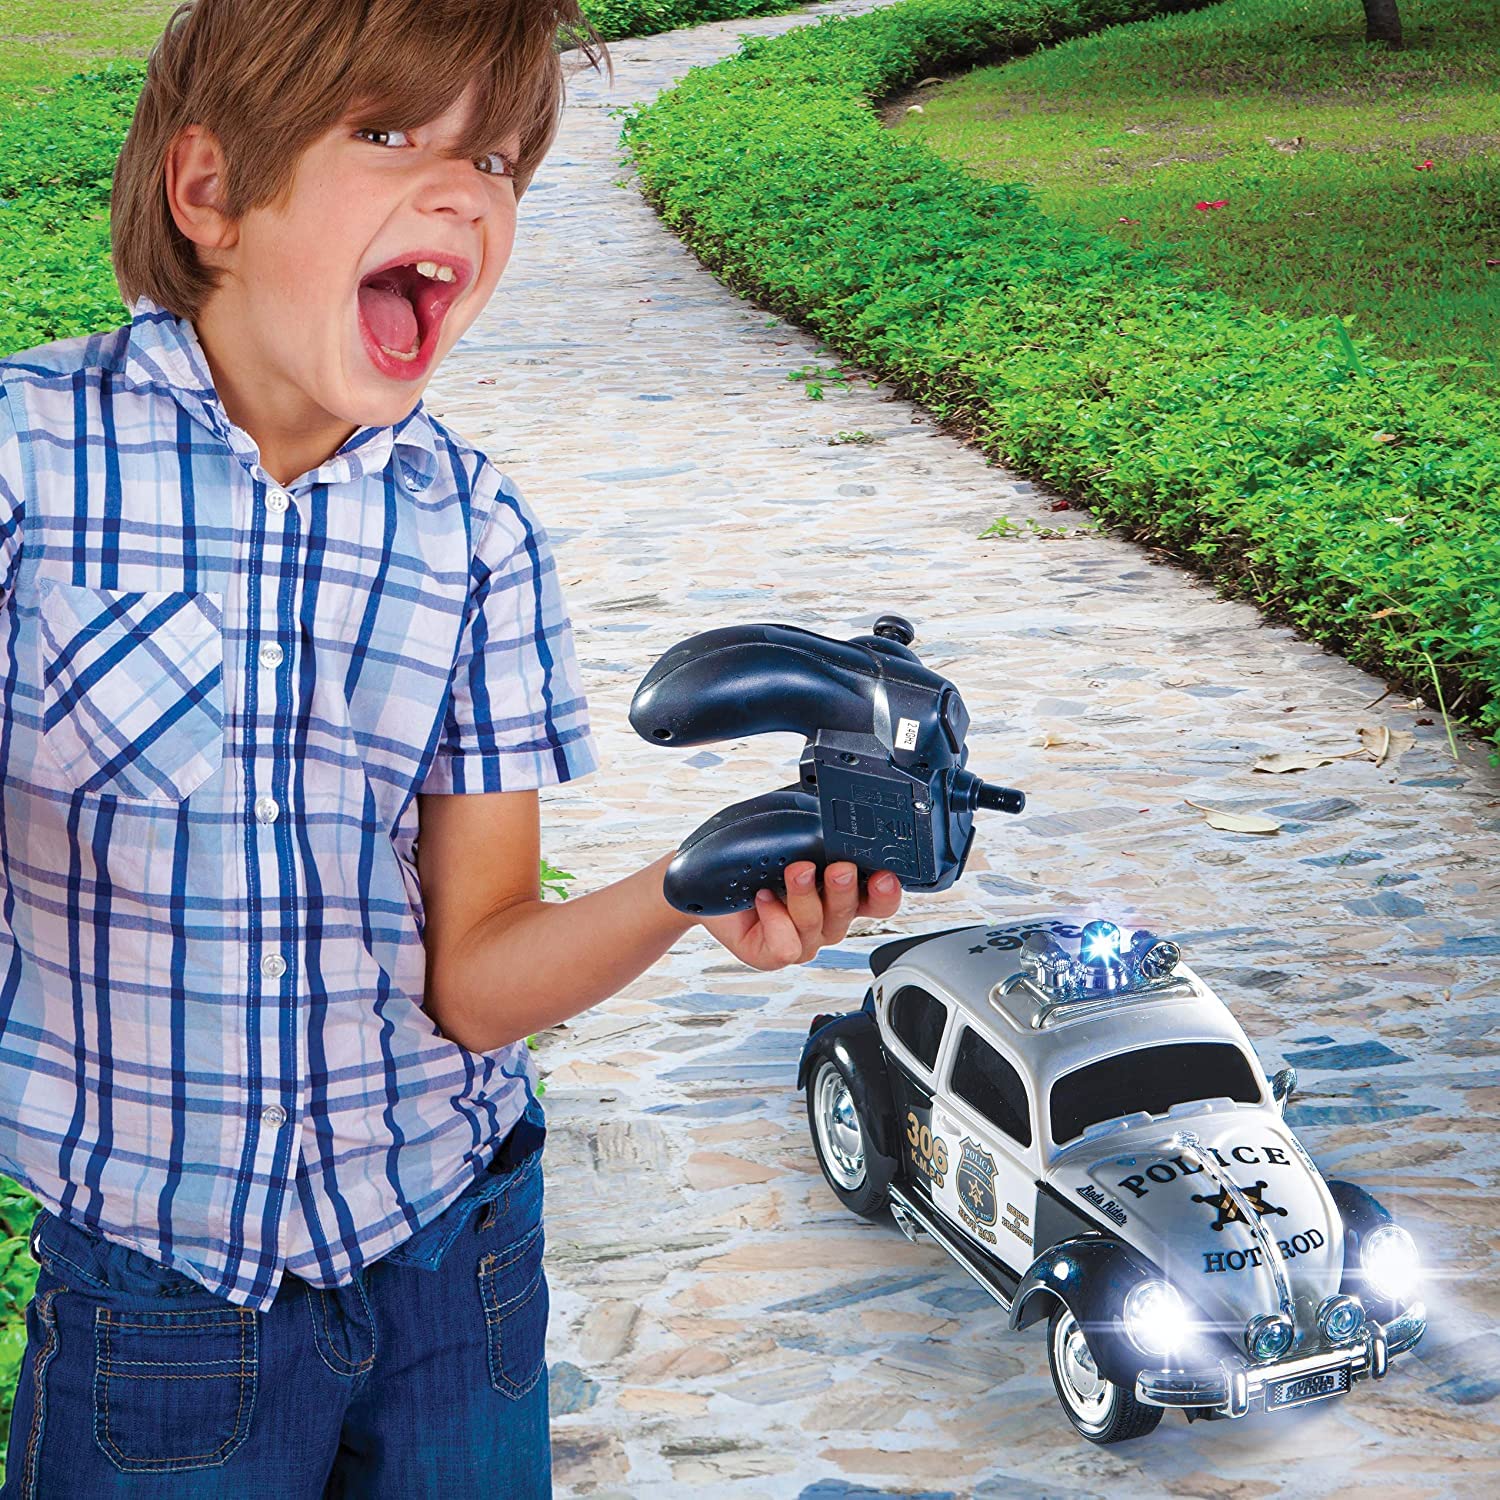 Top Race Remote Control Police Car, with Lights and Sirens | RC Police Car for Kids | Easy to Control, Rubber Tires, Heavy Duty Old Fashioned Style